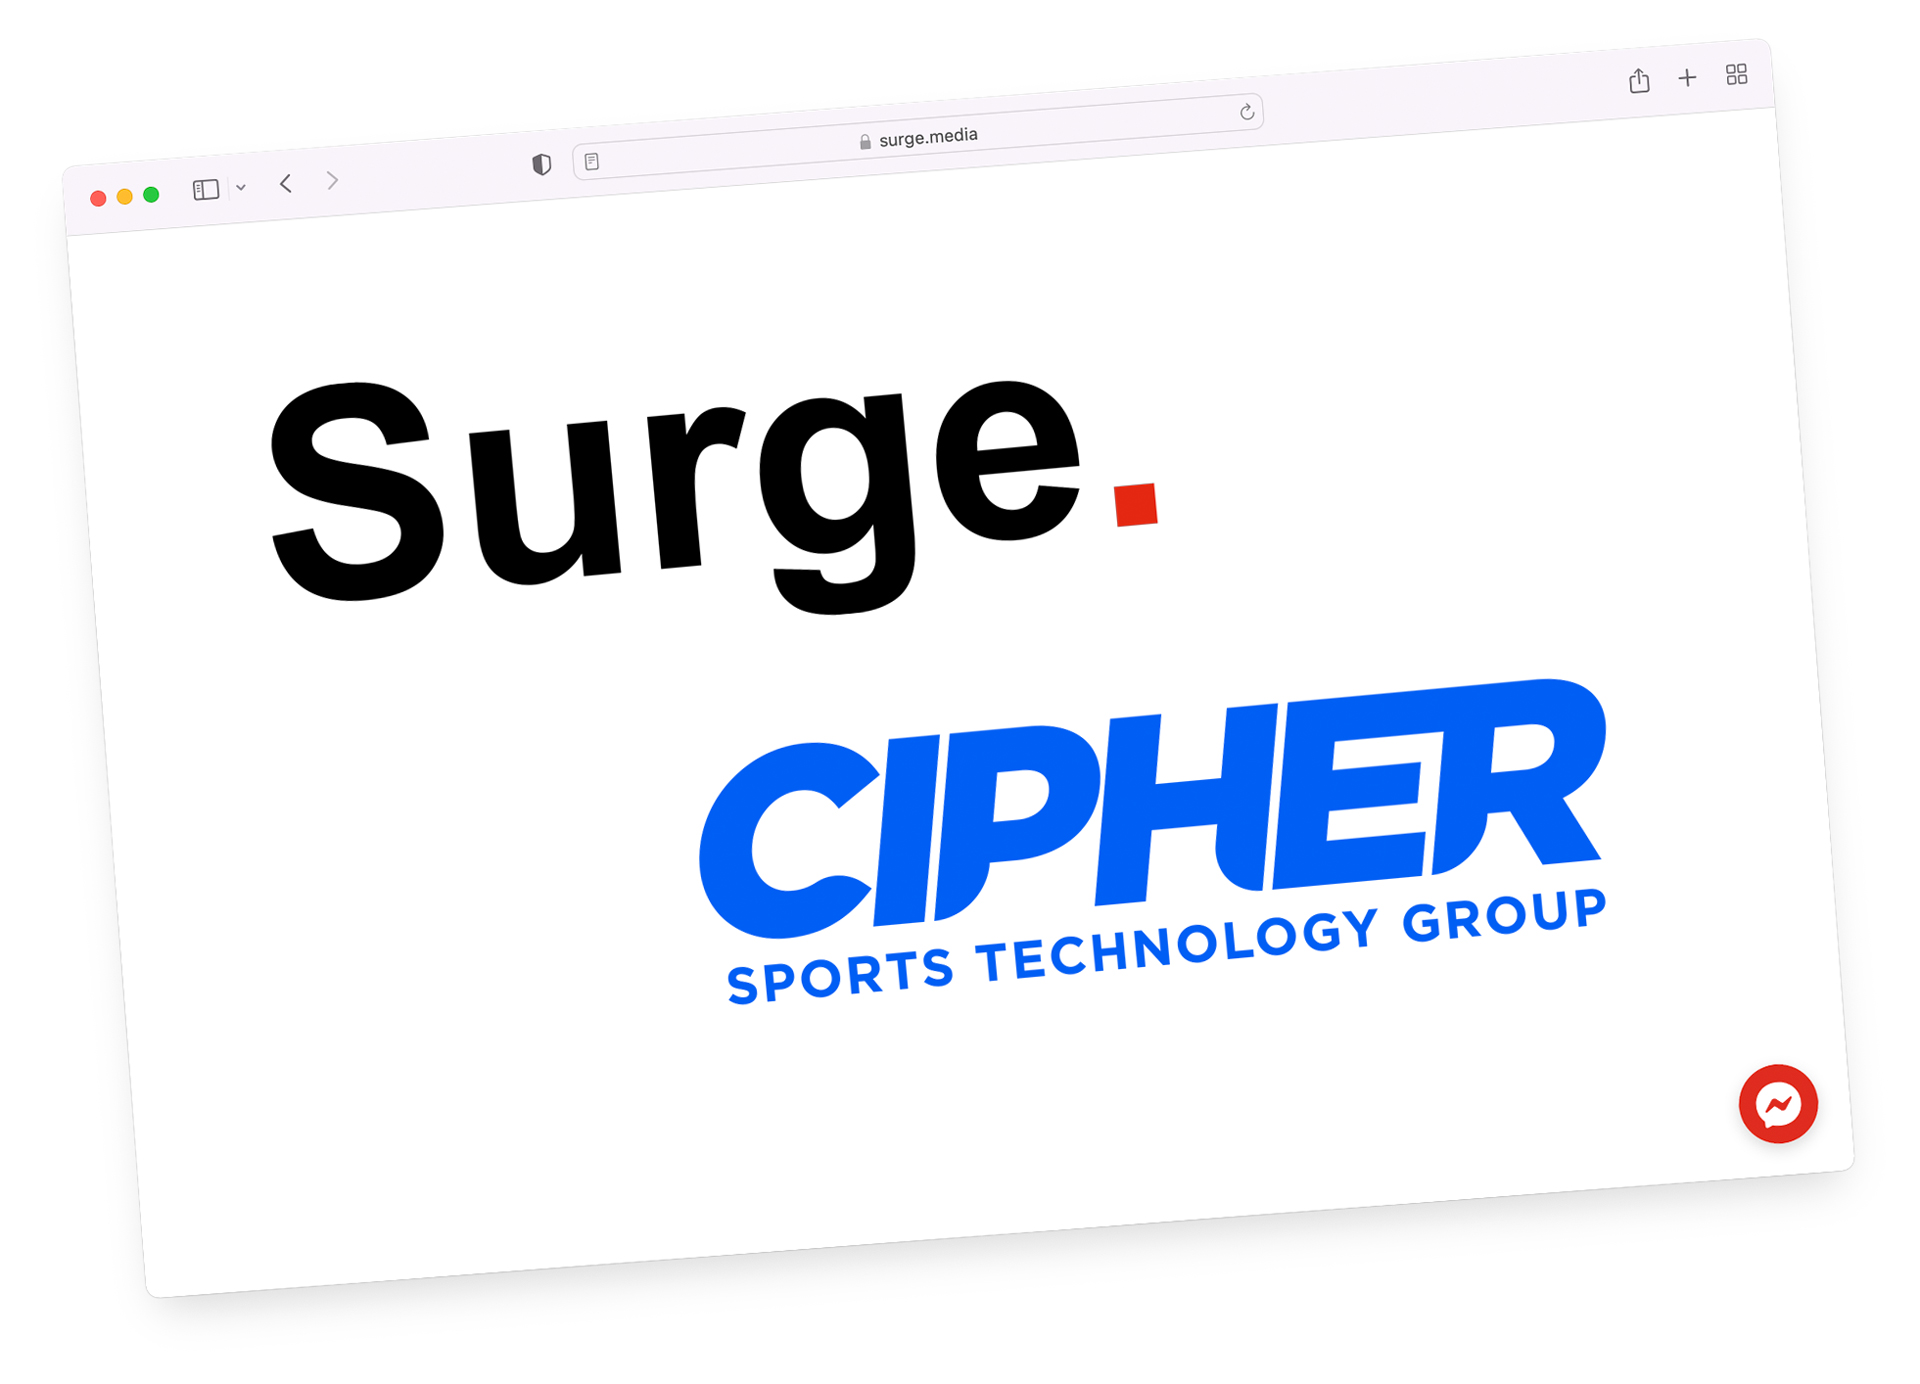 Surge.Media is Happy to Announce the Onboarding of Cipher Sports Technology Group as Its Latest Customer